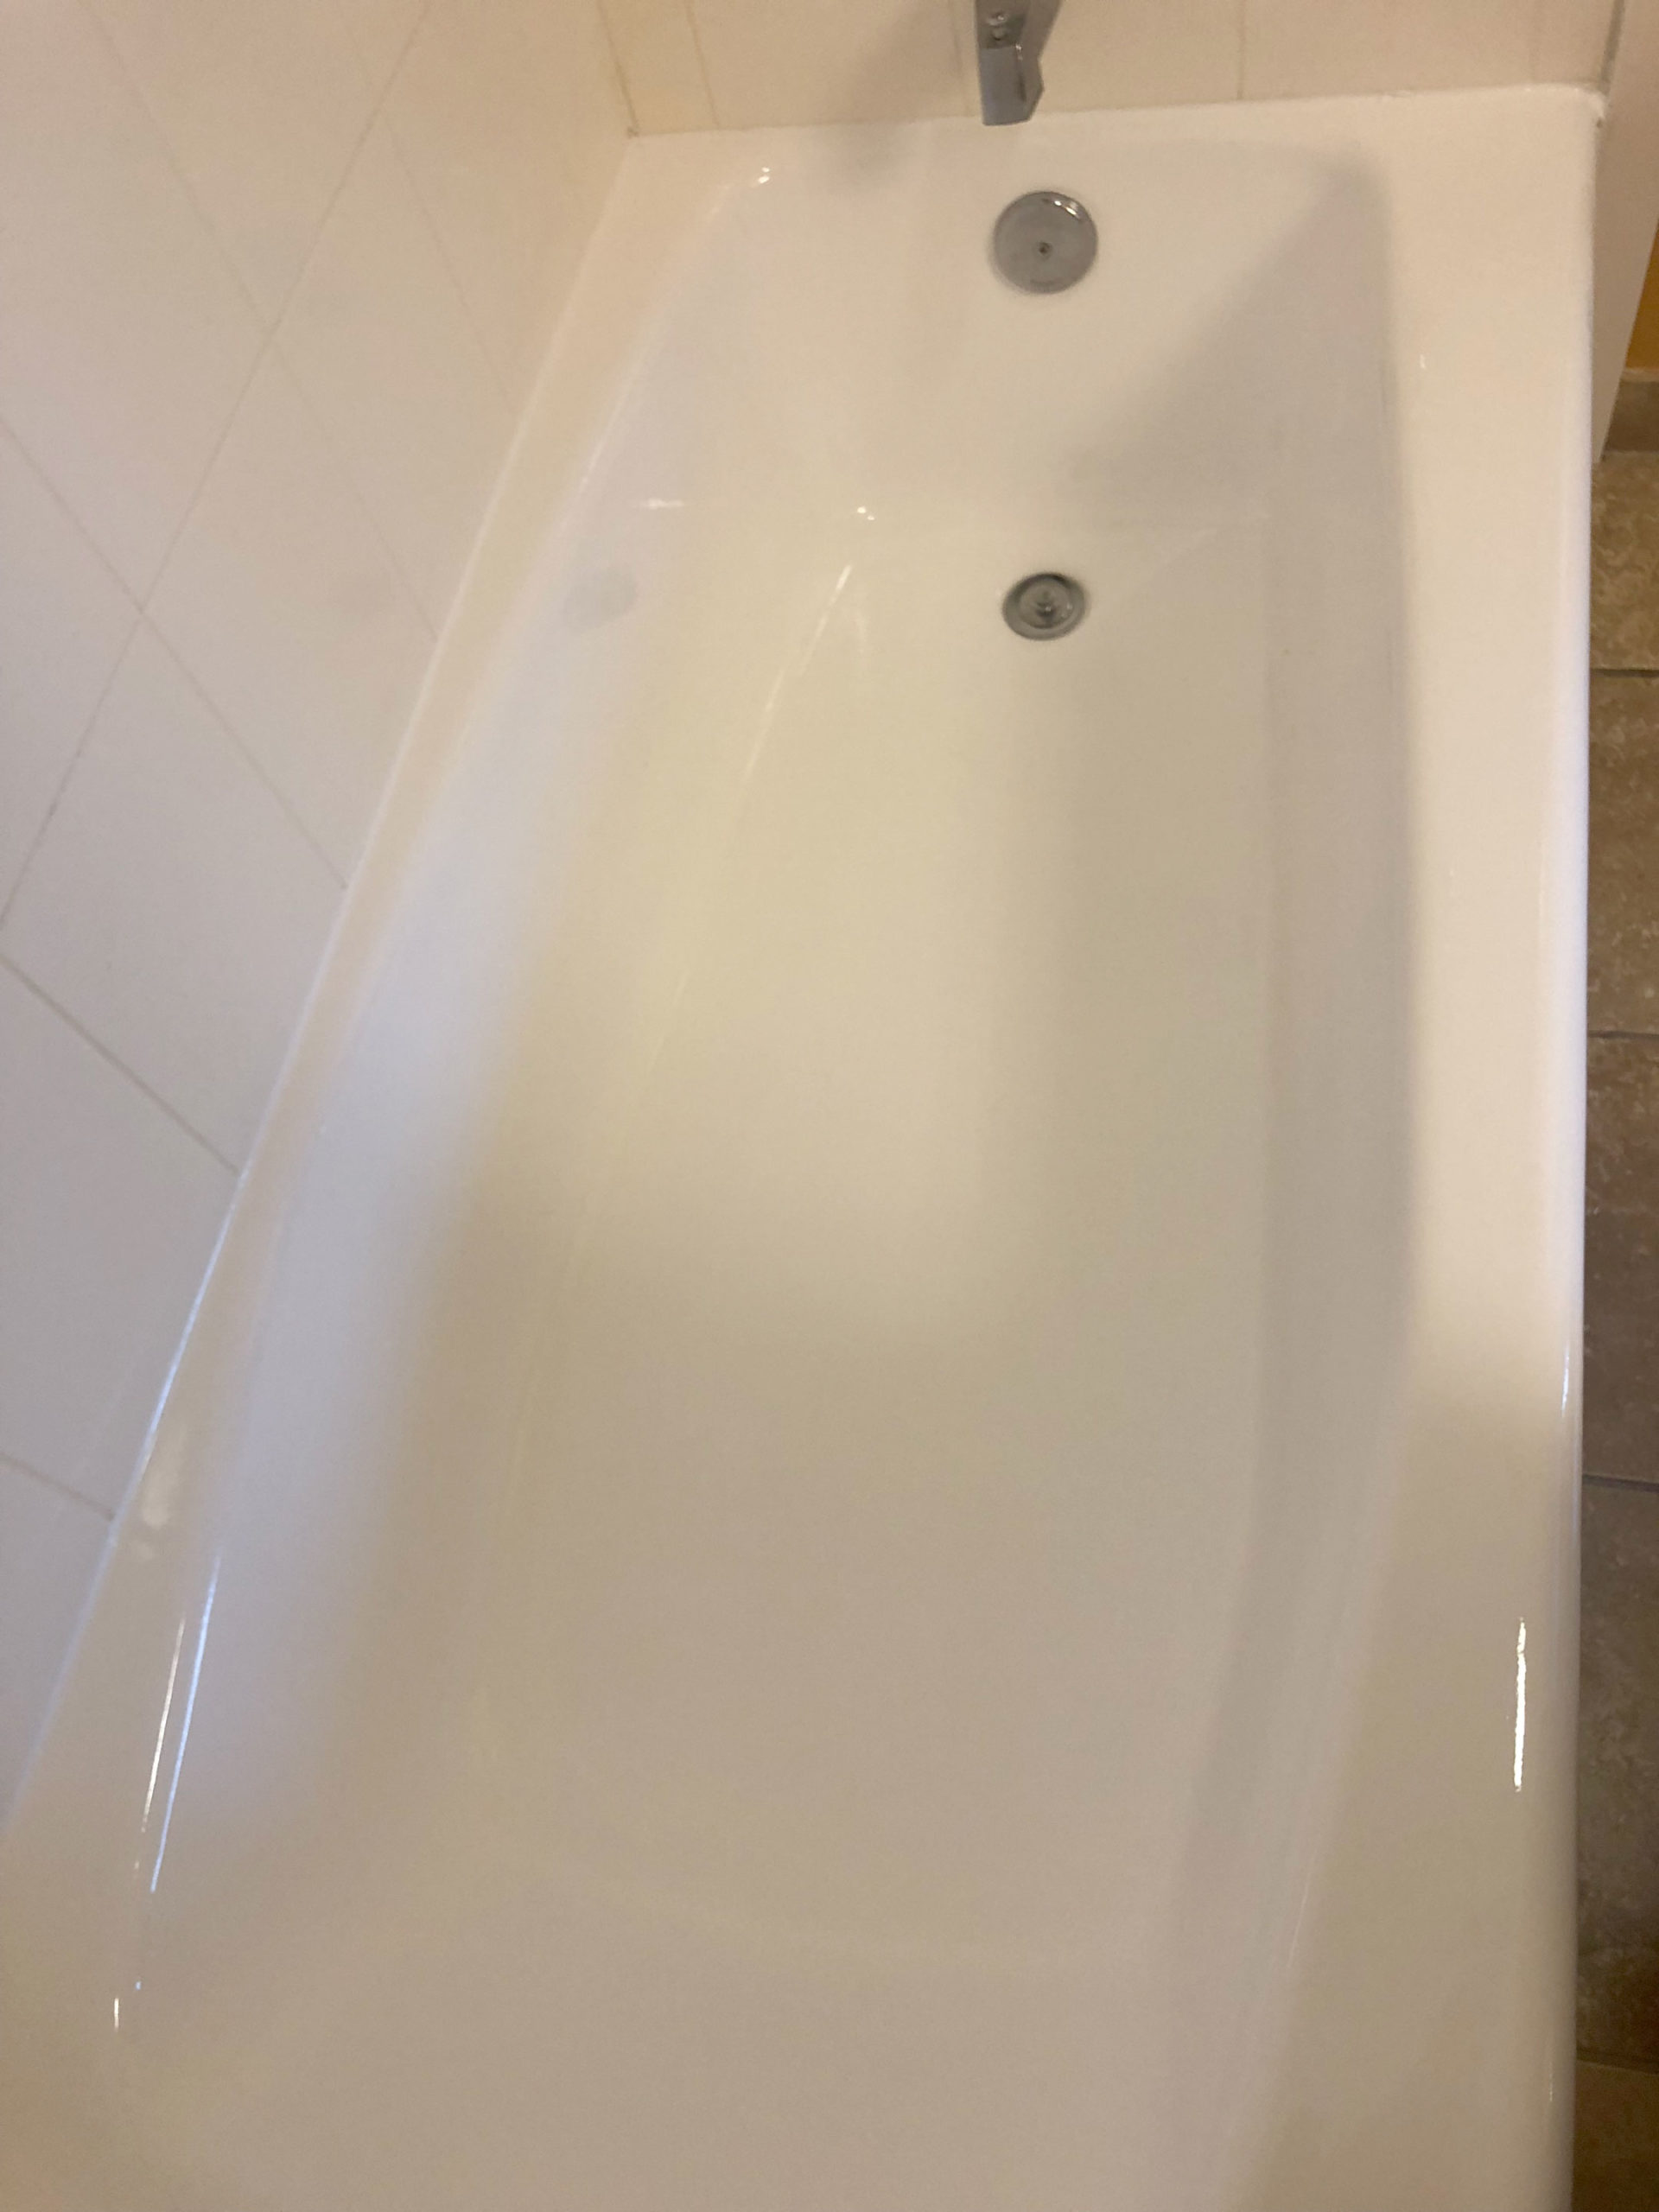 Chipped and peeling tub after